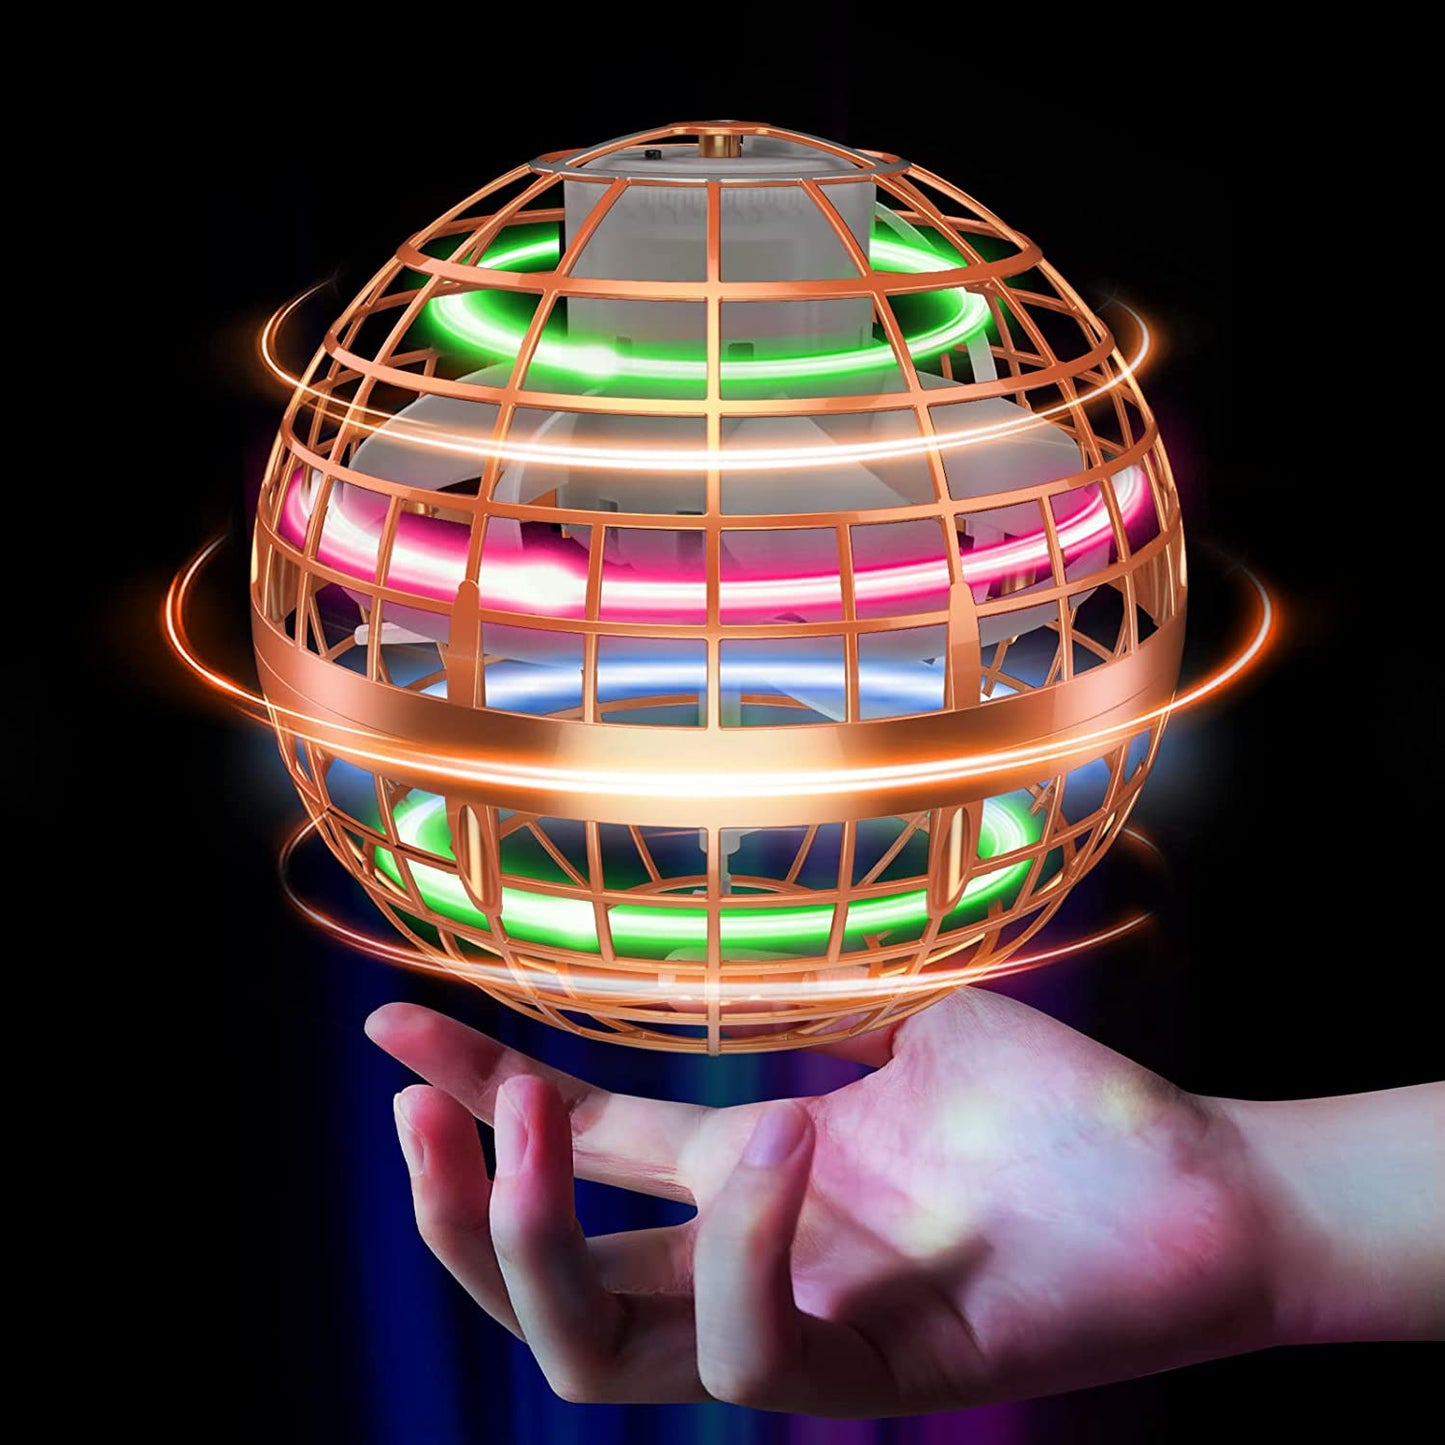  Flying Orb Ball Toys, Hover Orb, Hand Controlled Mini Drone  Flying Ball Globe Shape Spinning UFO Magic Flying Boomerang Spinner Kids  Adults Indoor Outdoor Toys Games : Toys & Games